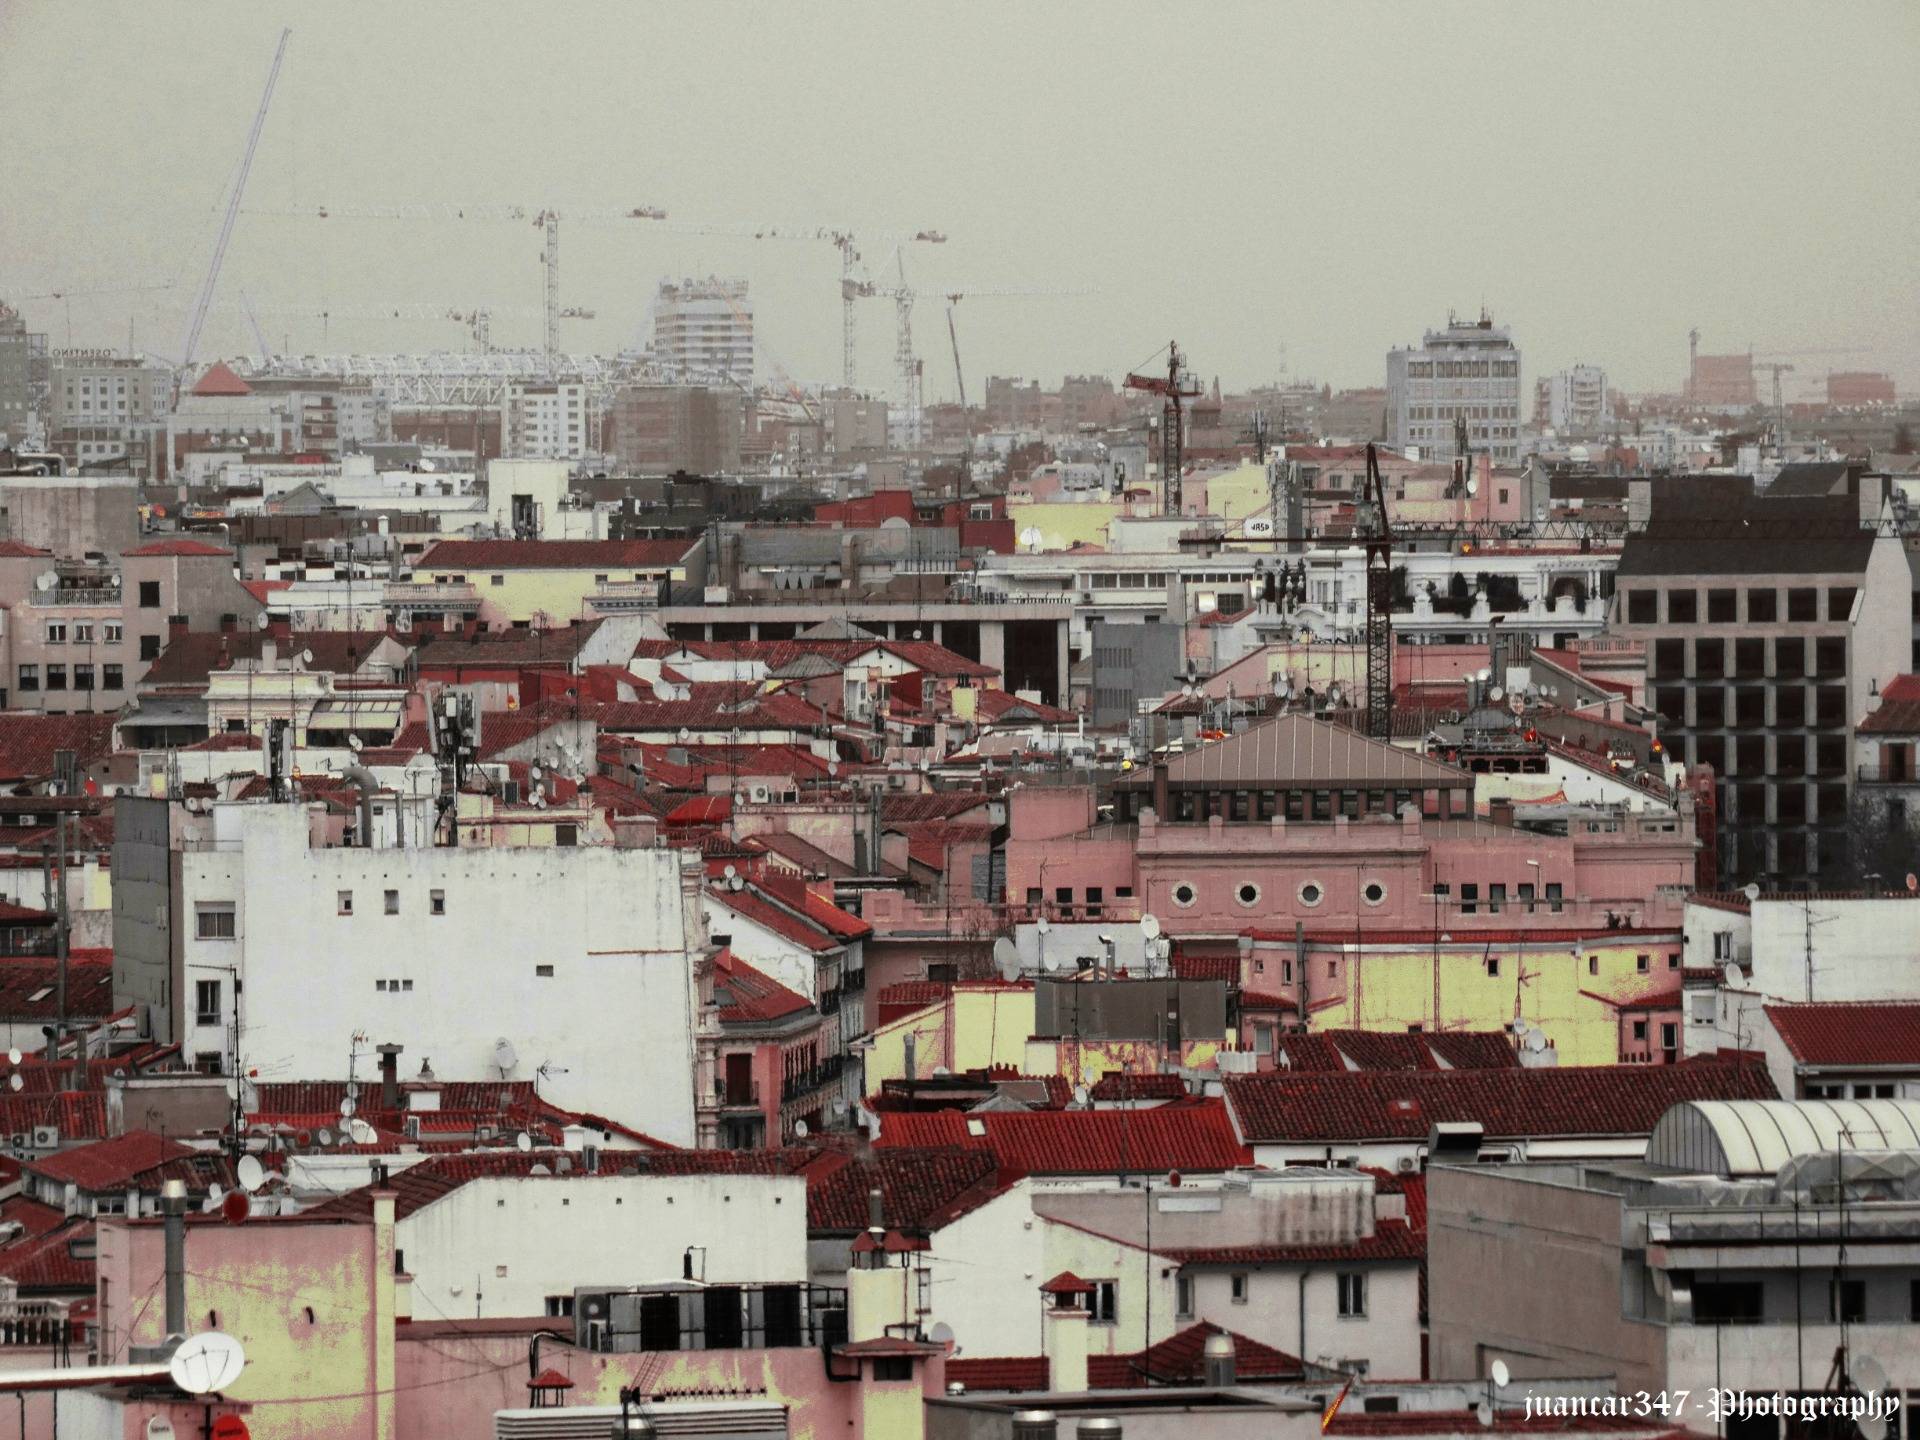 Another panoramic view of diverse Madrid